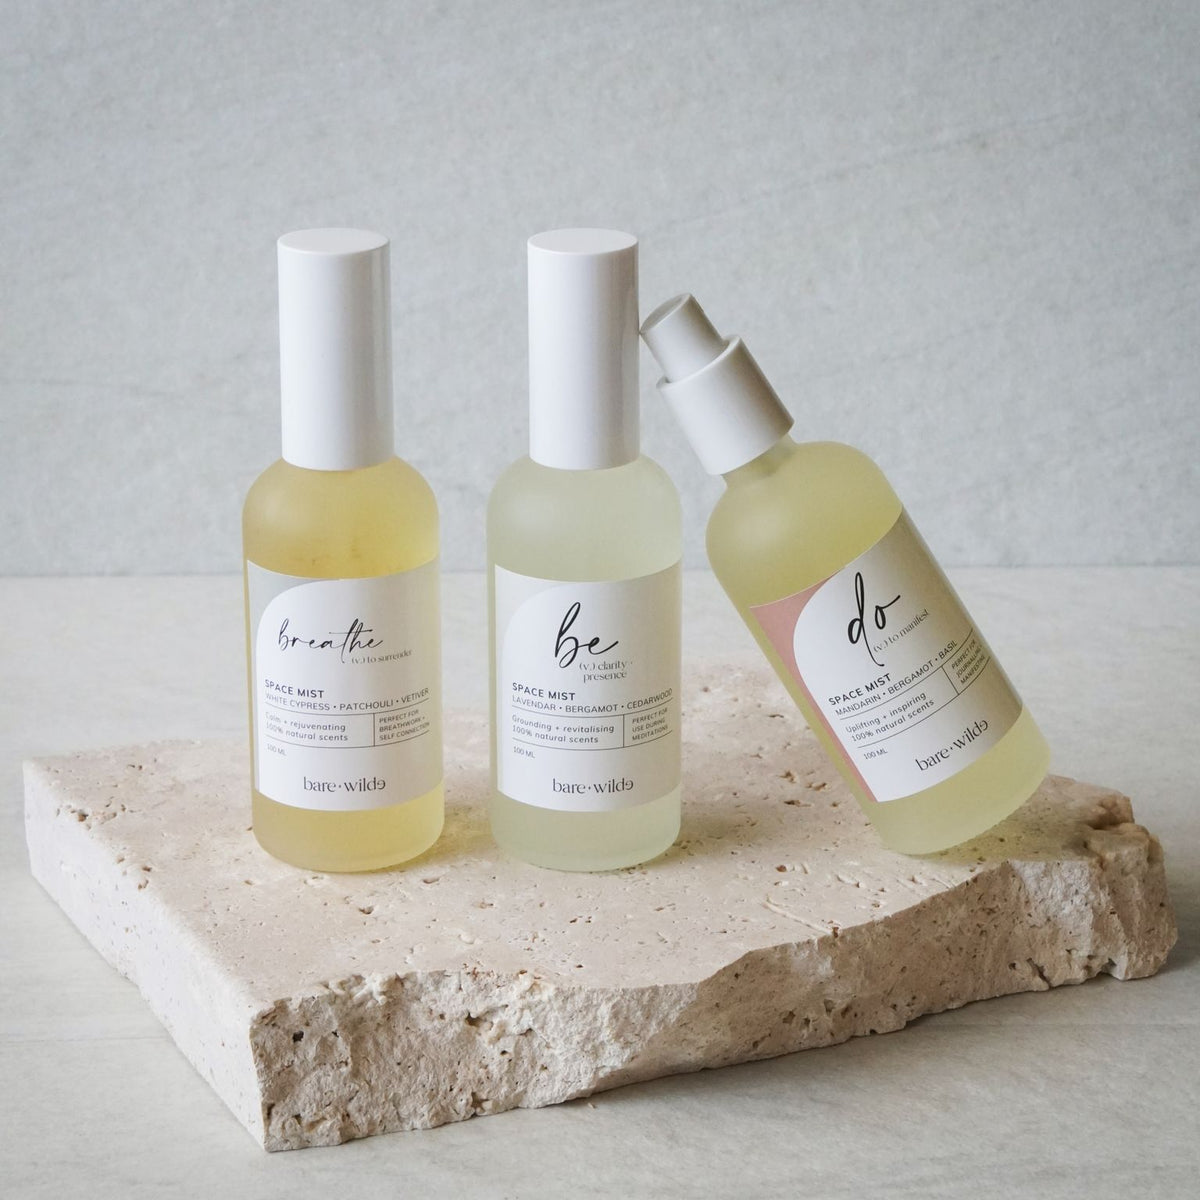 space mist bundle of the be, do and breathe range made will all natural ingredients and essential oils